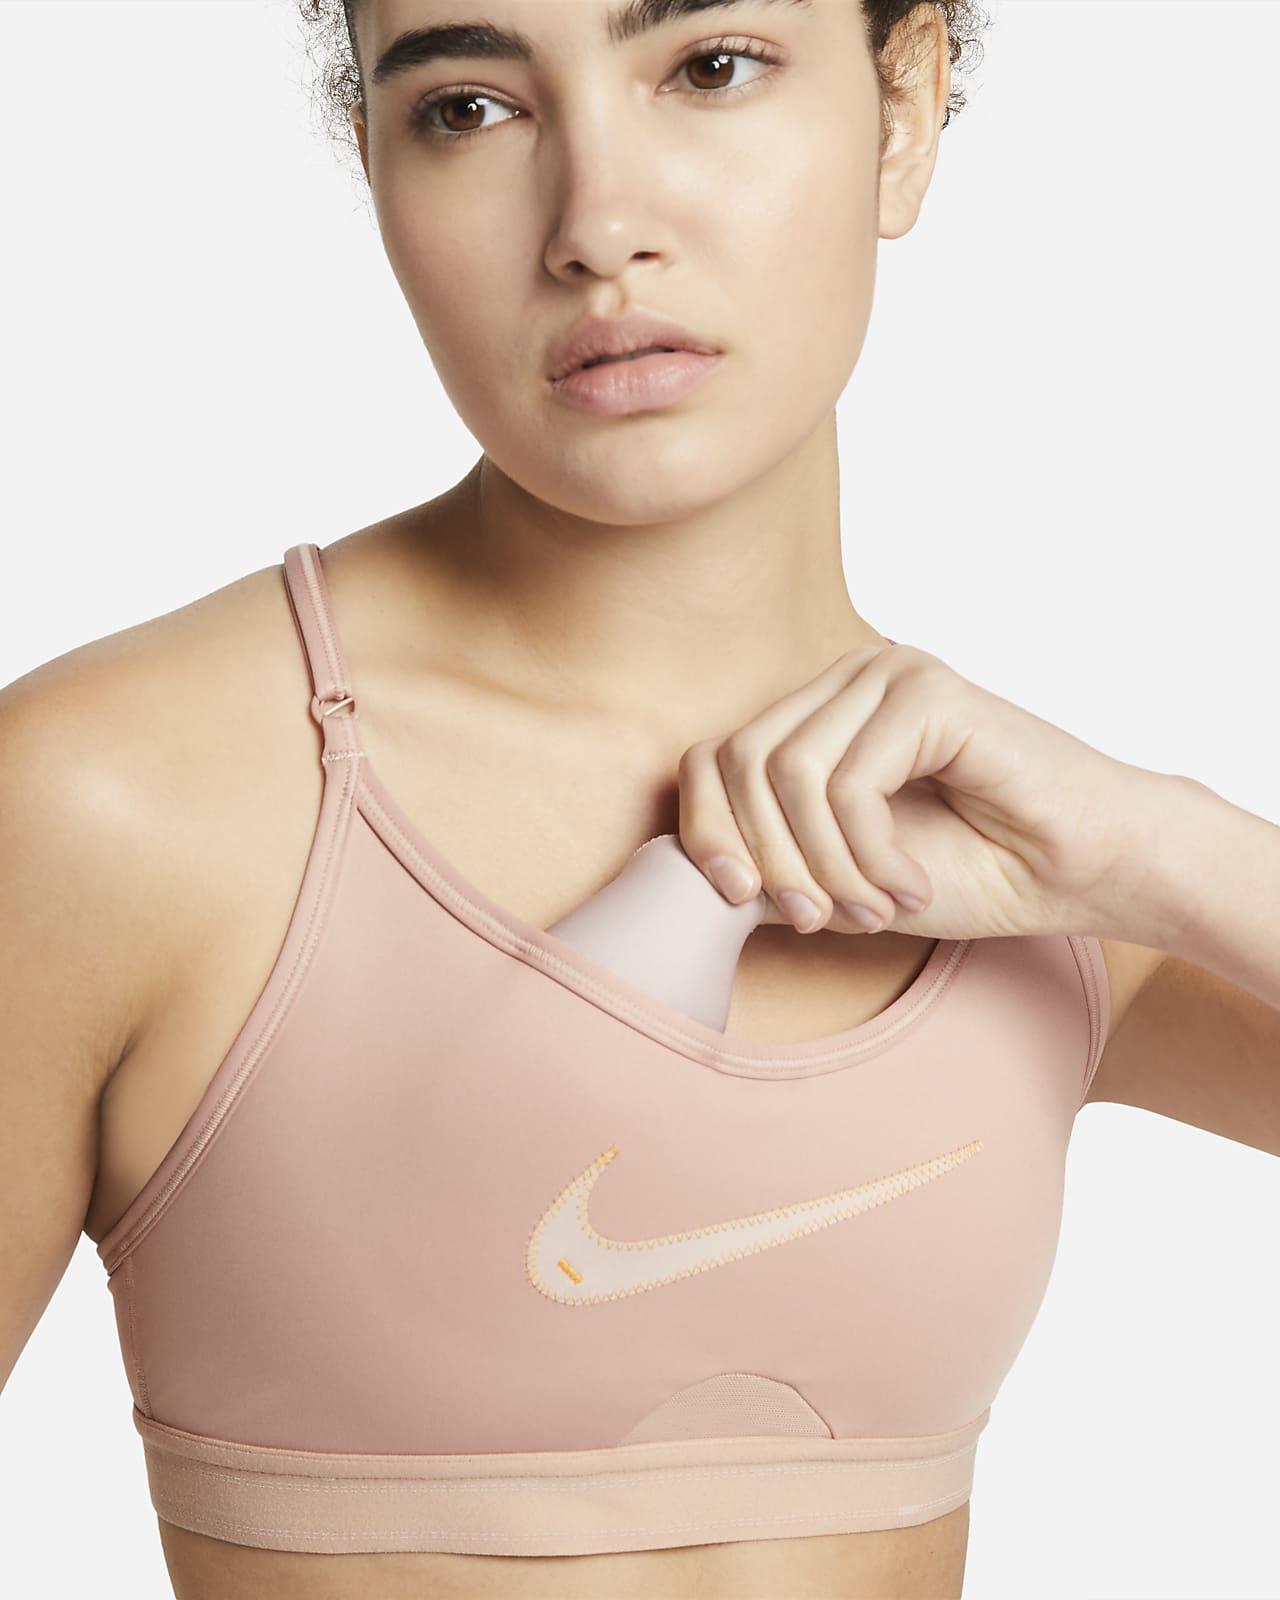 Nike Indy Women's Light-Support Padded Graphic Sports Bra. Nike AT